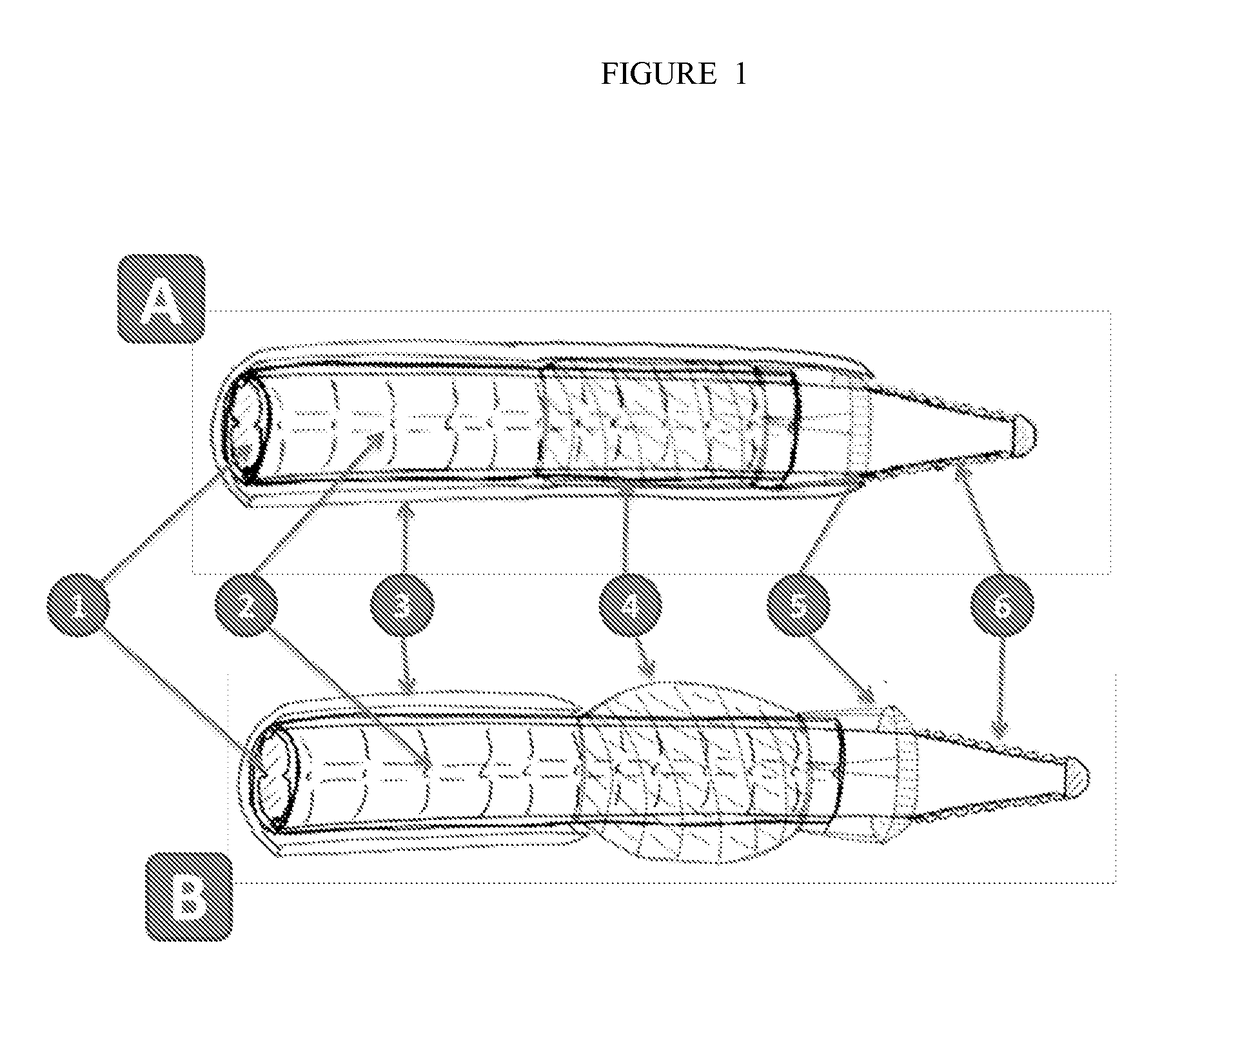 Devices and Methods for Treating Occlusion of the Ophthalmic Artery